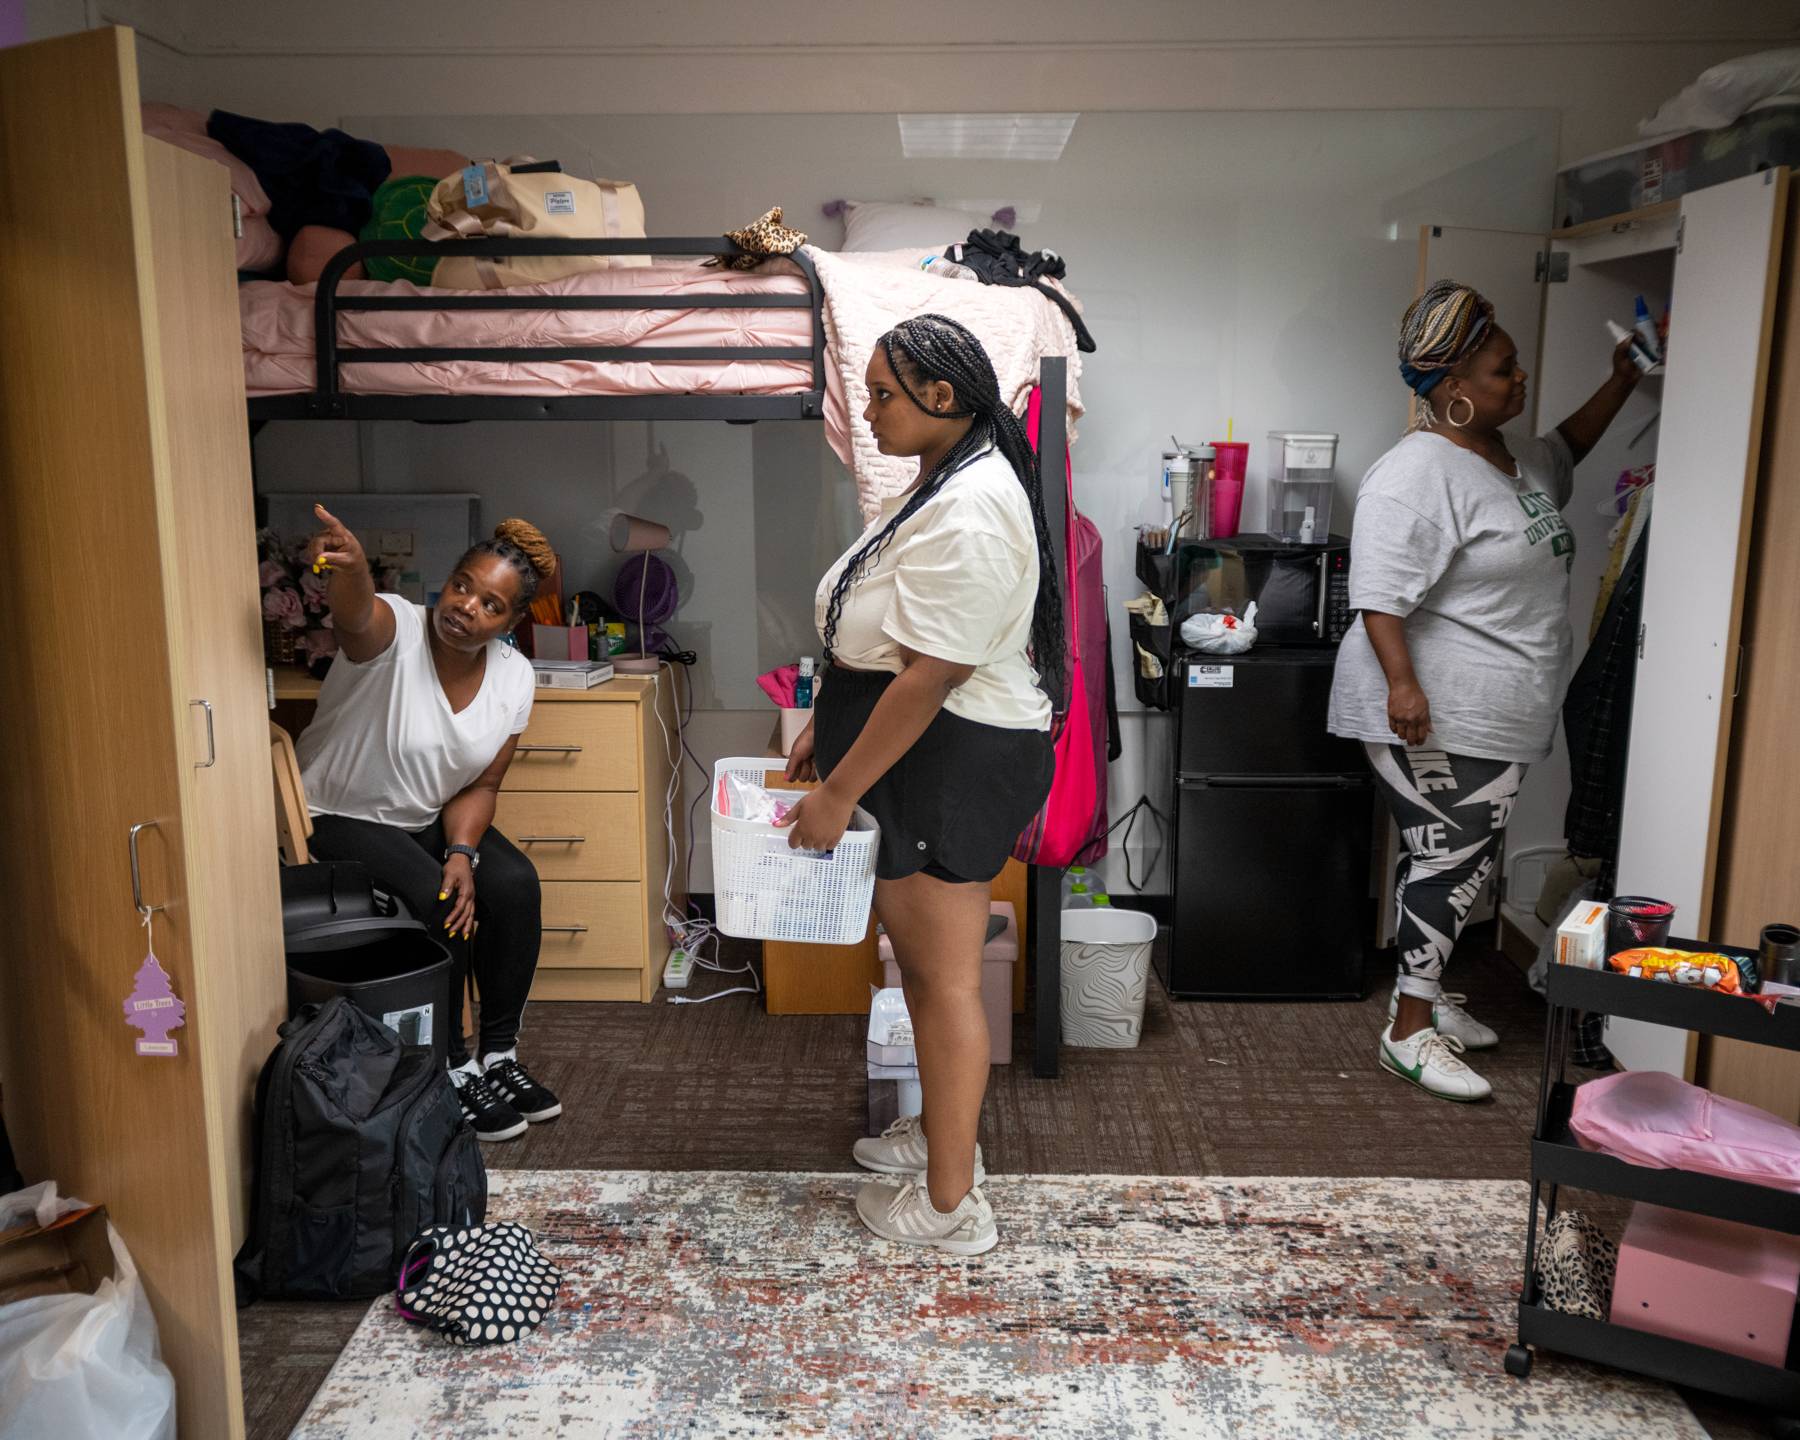 A student gets help from family as they move into their new residence hall room